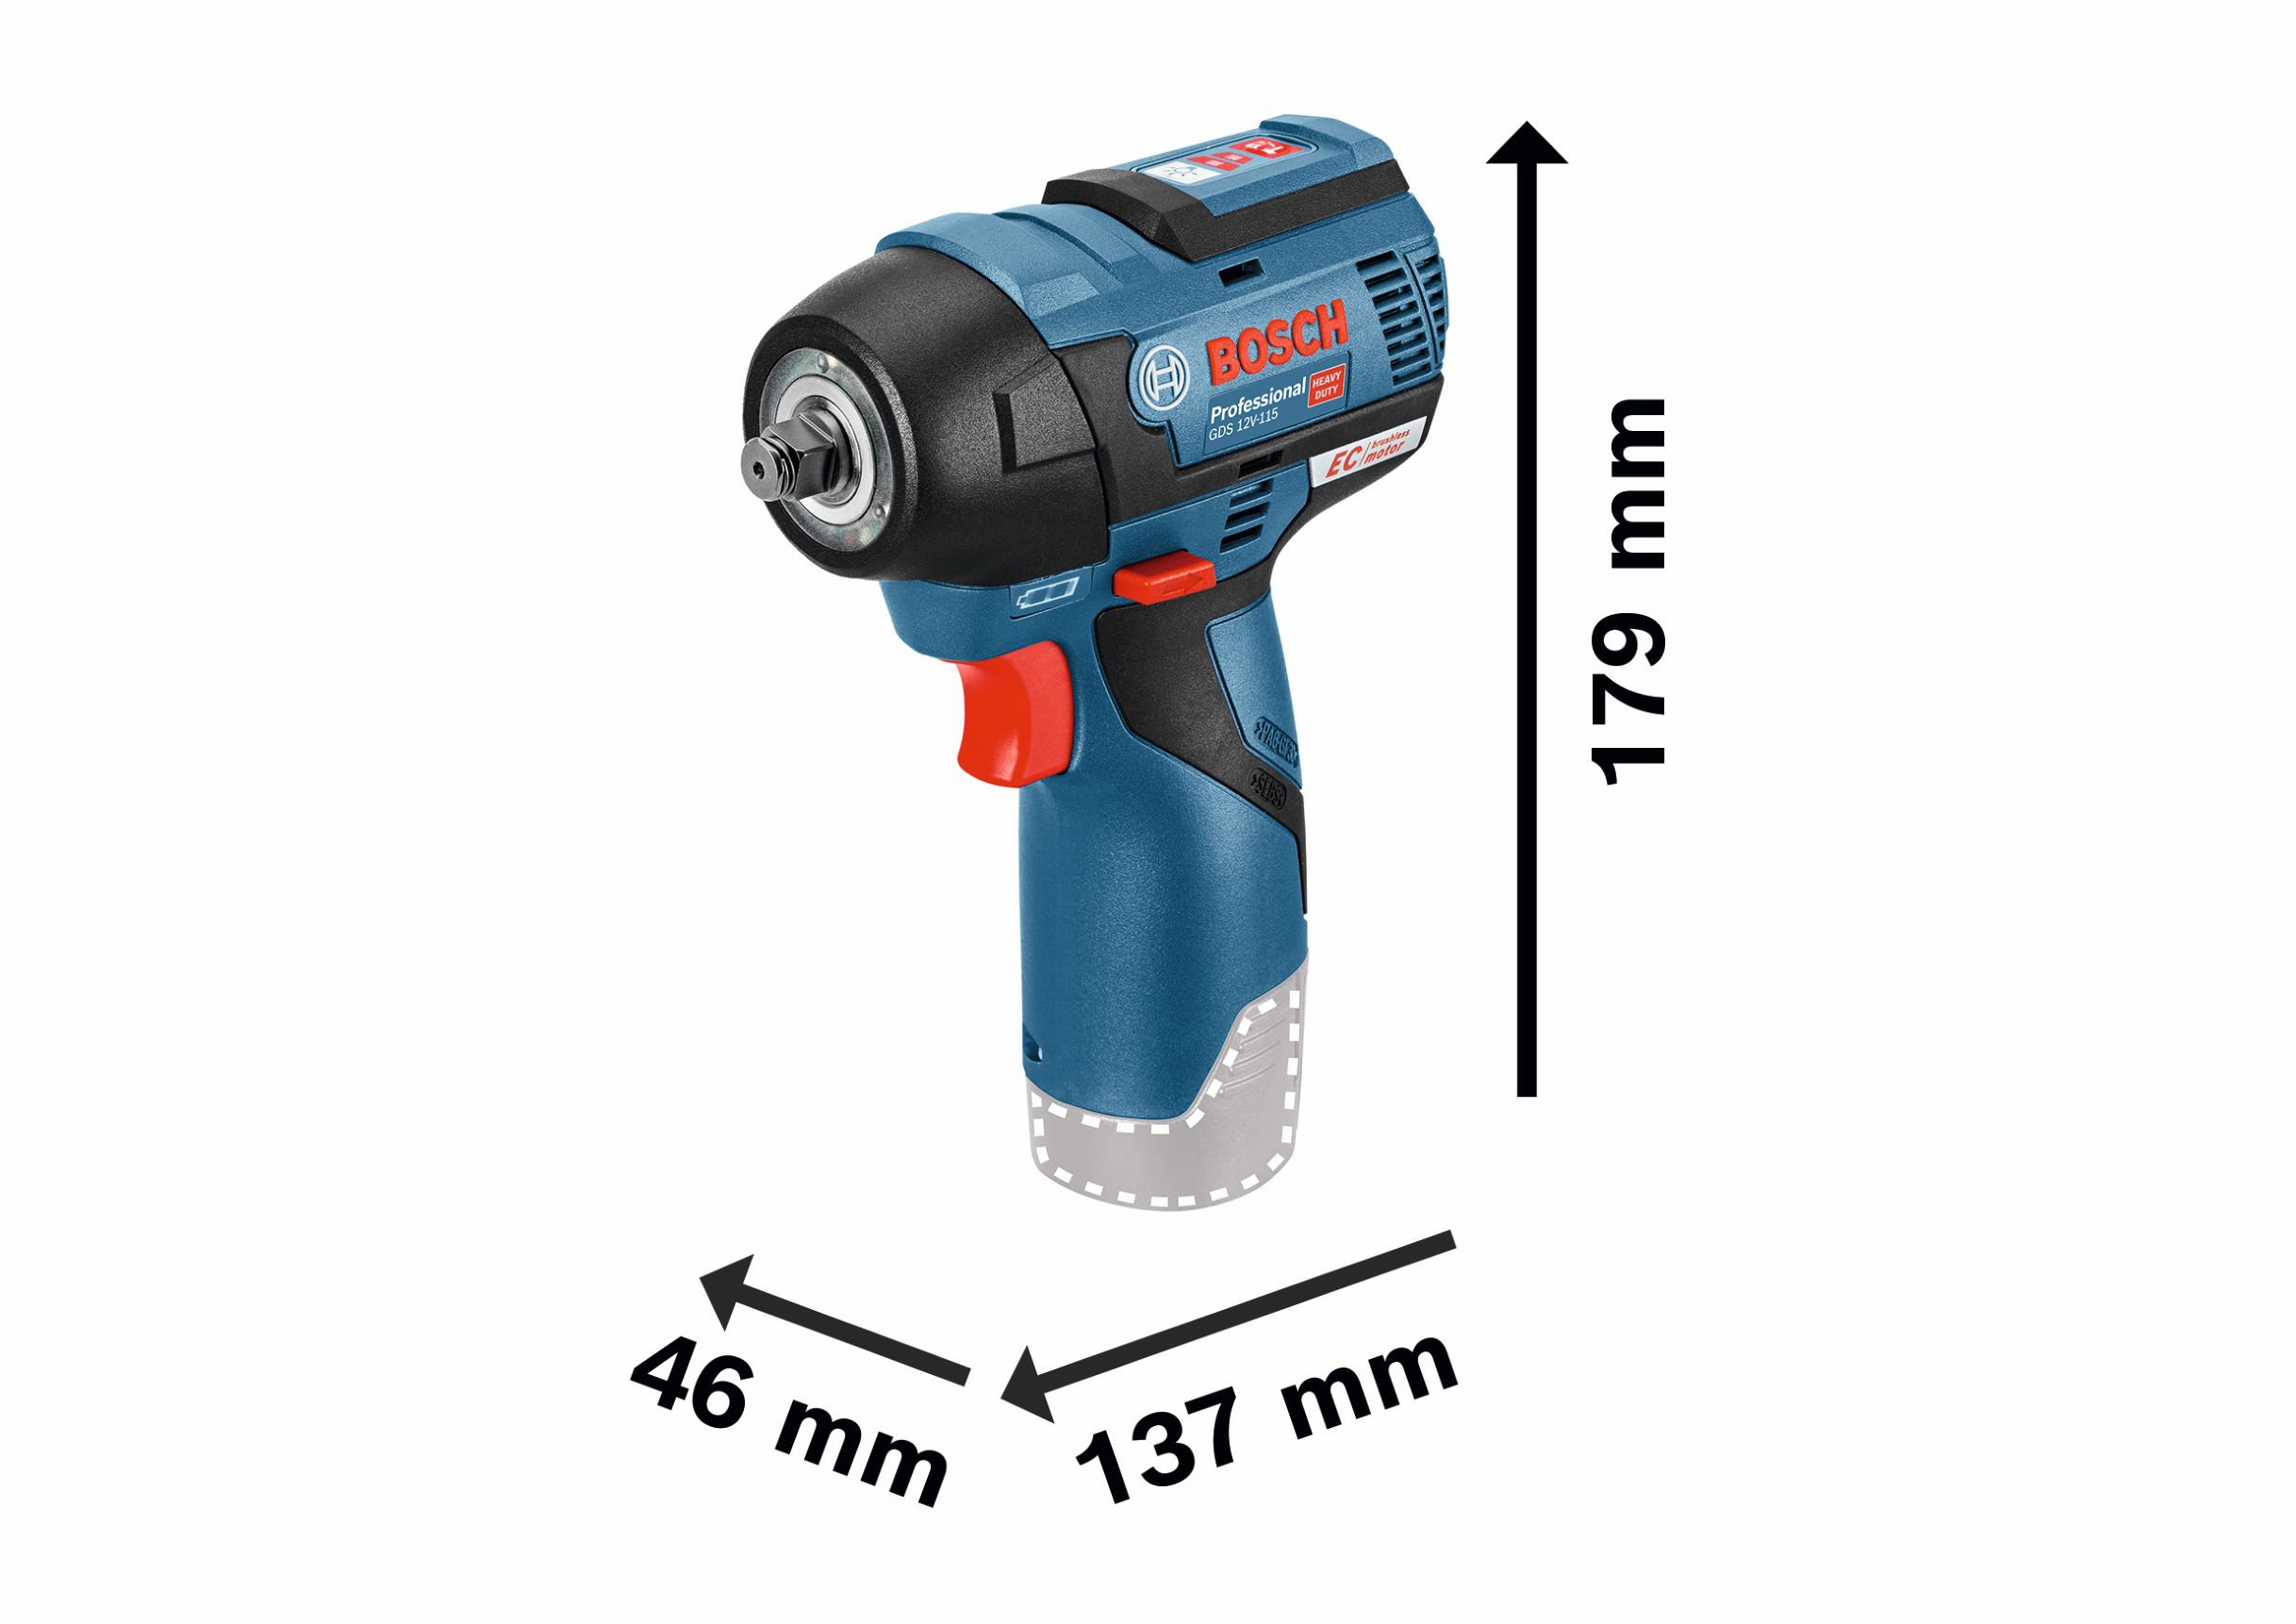 GDS 12V-115 EC Professional Cordless Impact Wrench in L-Boxx Bosch - 3